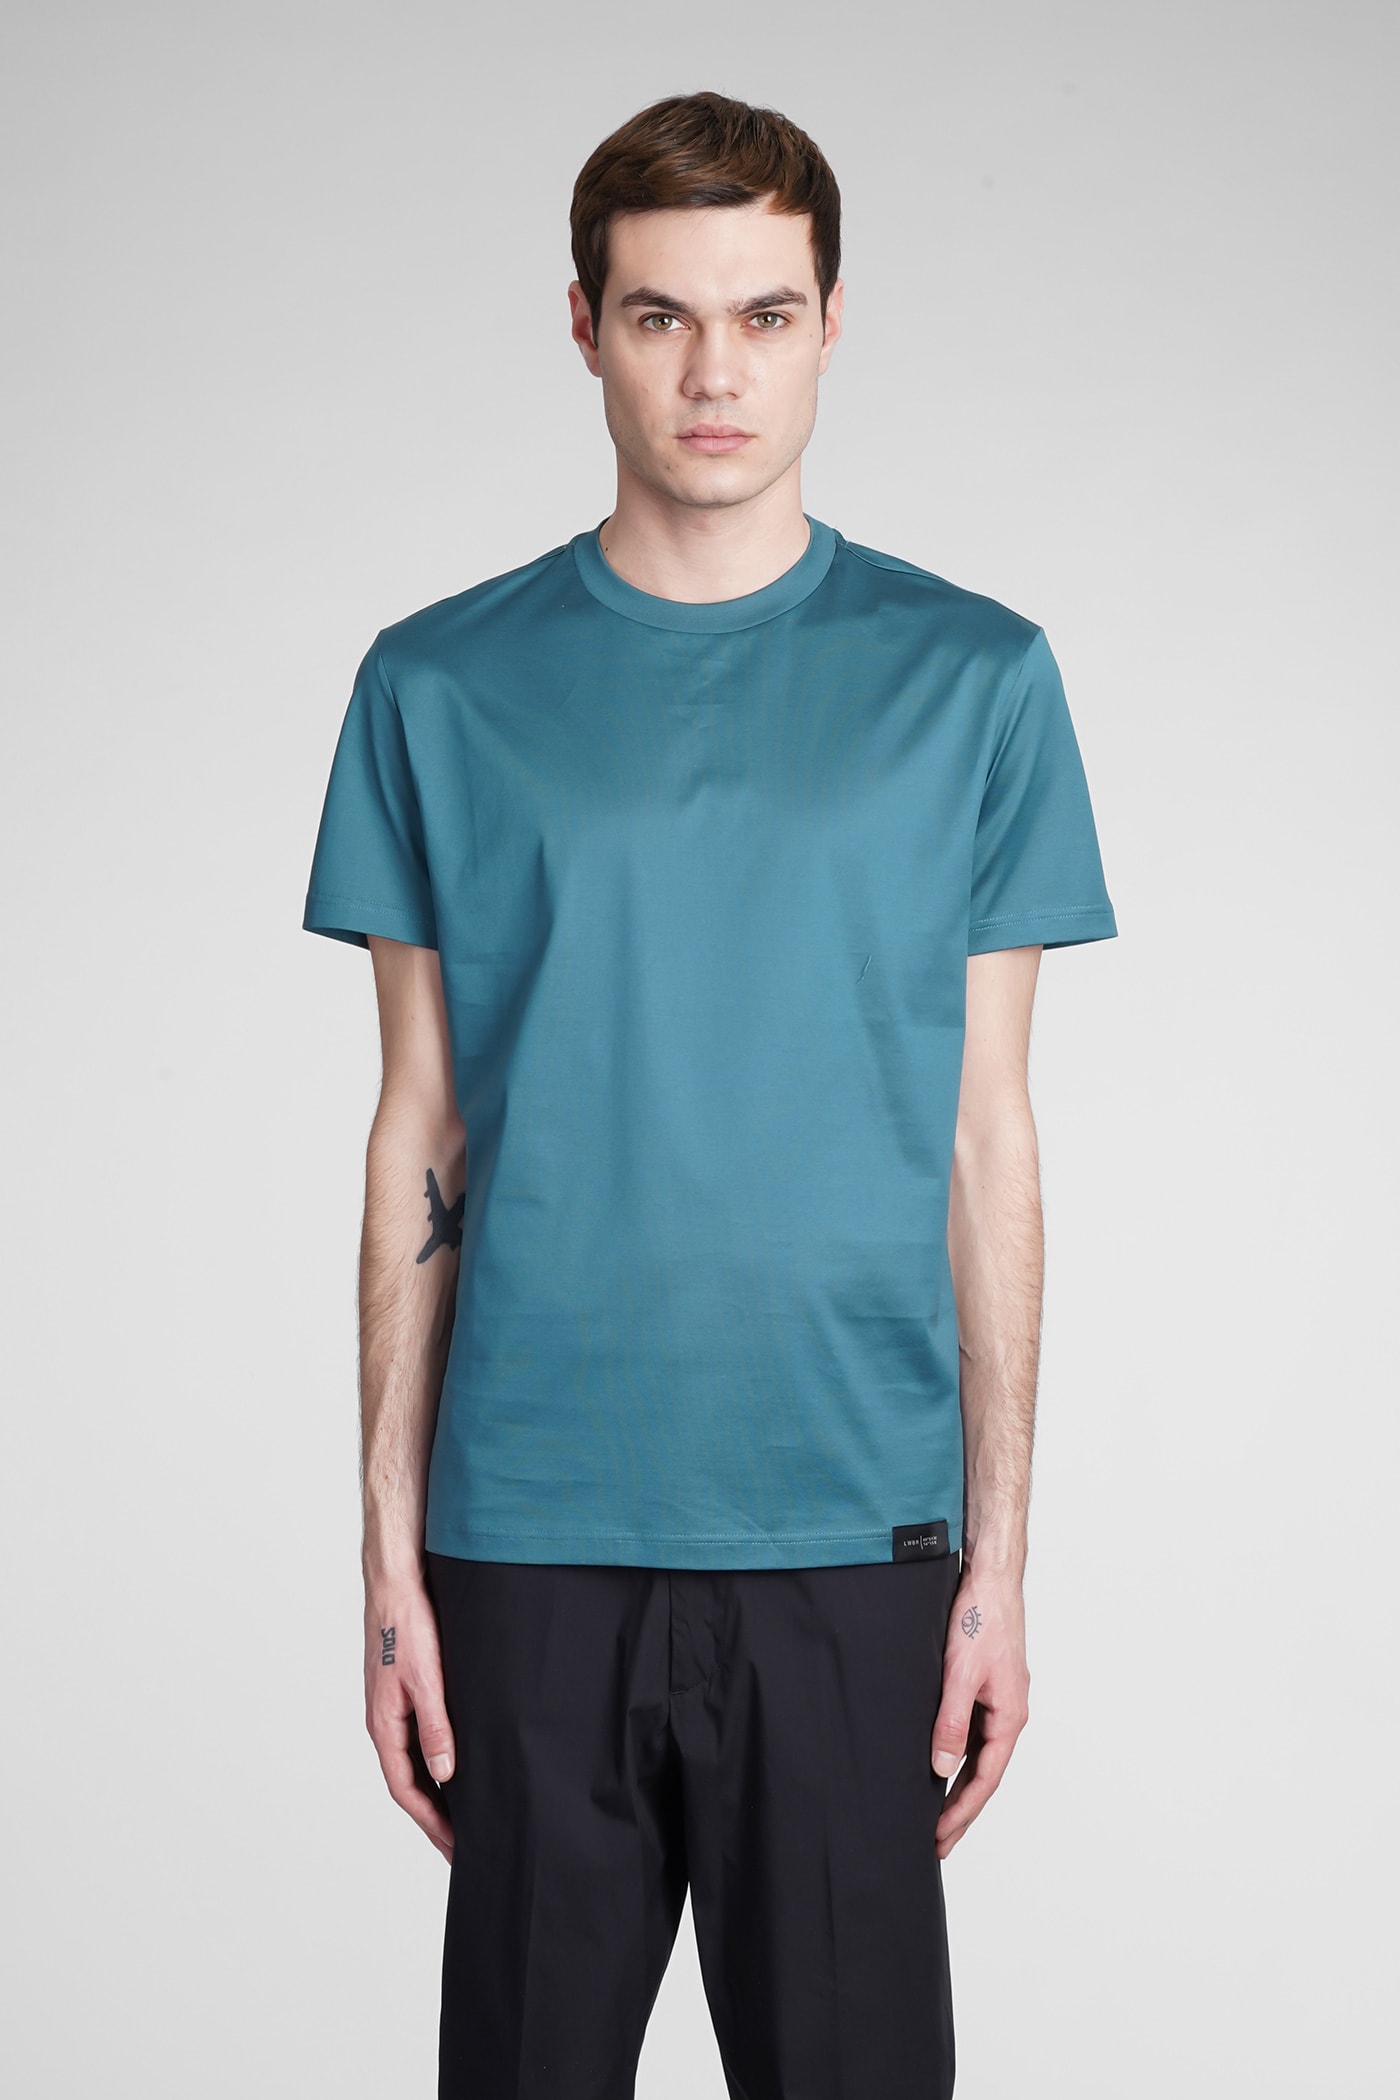 LOW BRAND T-SHIRT IN GREEN JERSEY